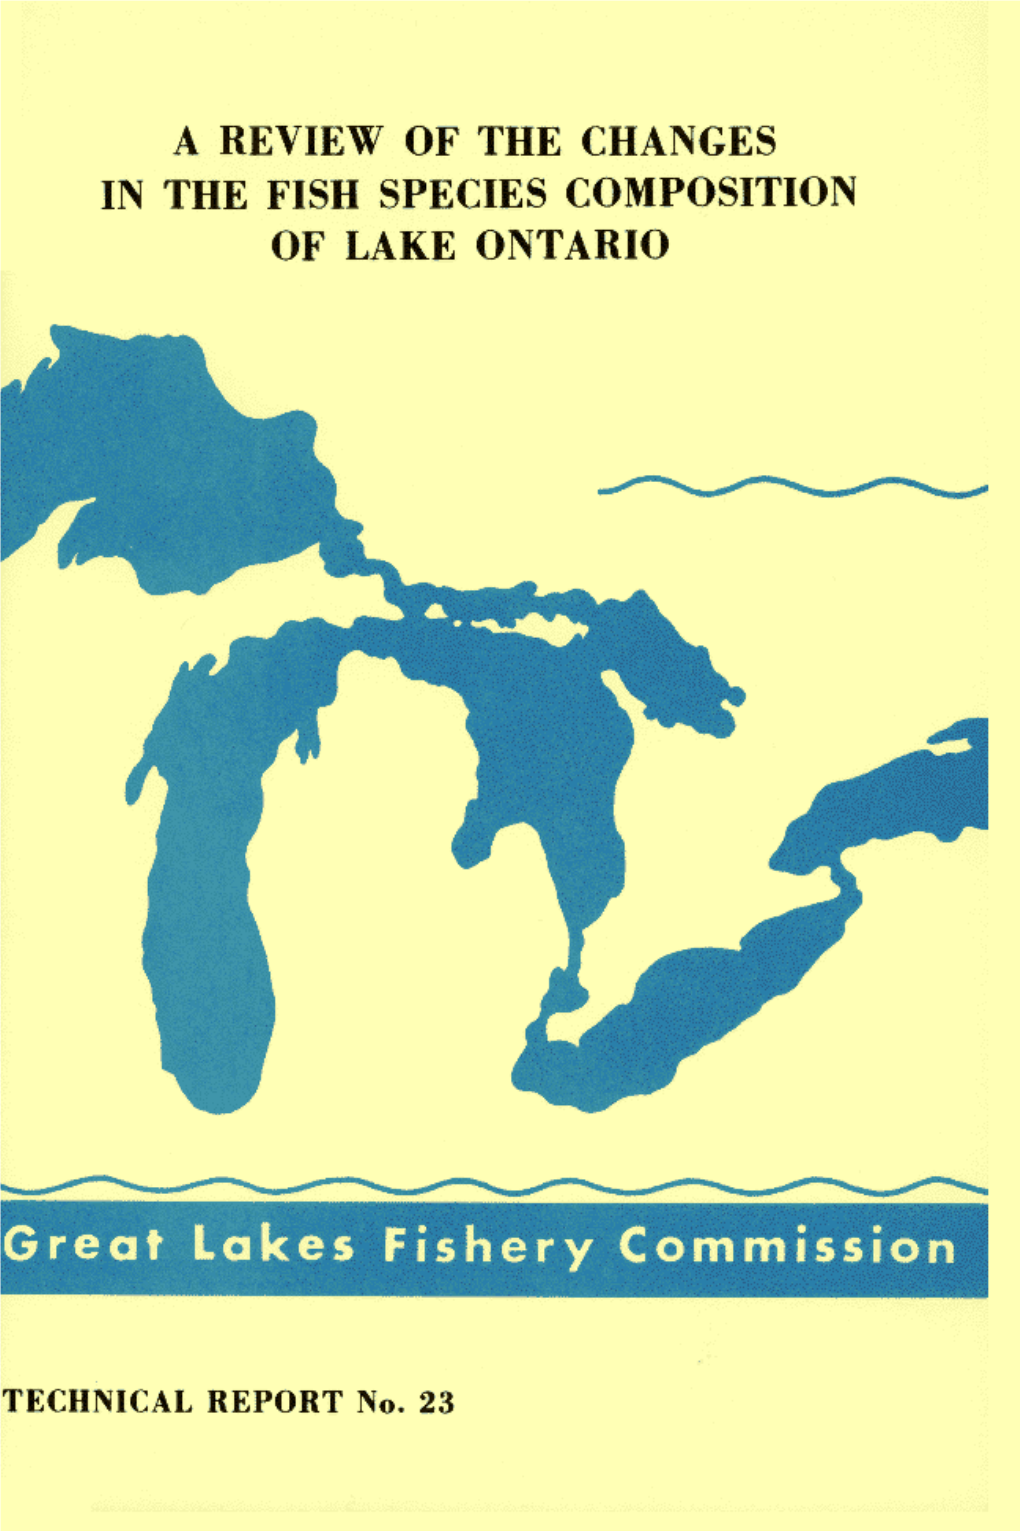 A Review of the Changes in the Fish Species Composition of Lake Ontario